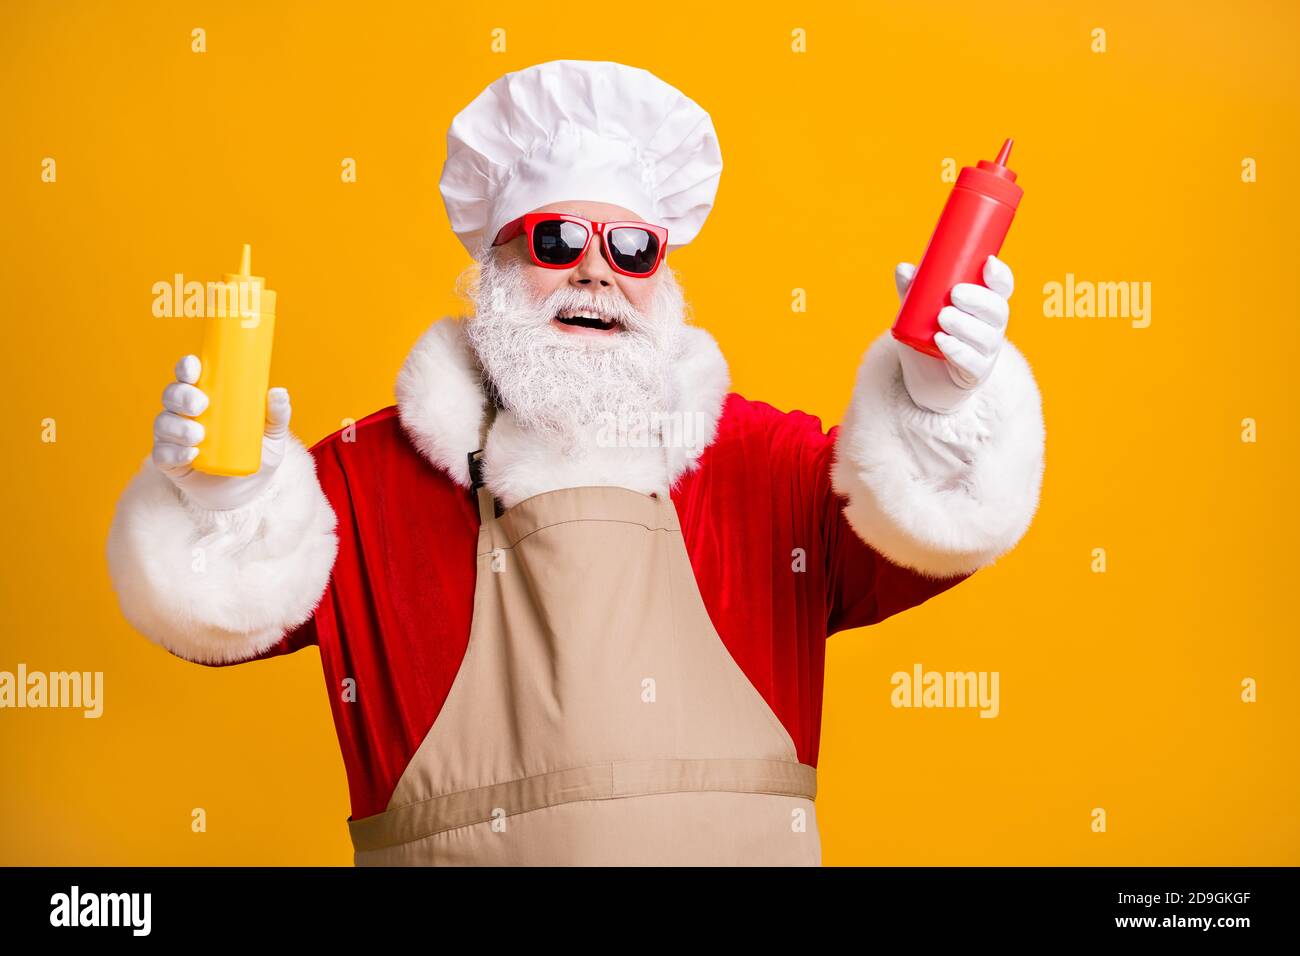 White grey beard hair santa claus in chef headwear cook x-mas christmas party snack hold mustard tomato sauce bottle wear sunglass apron isolated Stock Photo